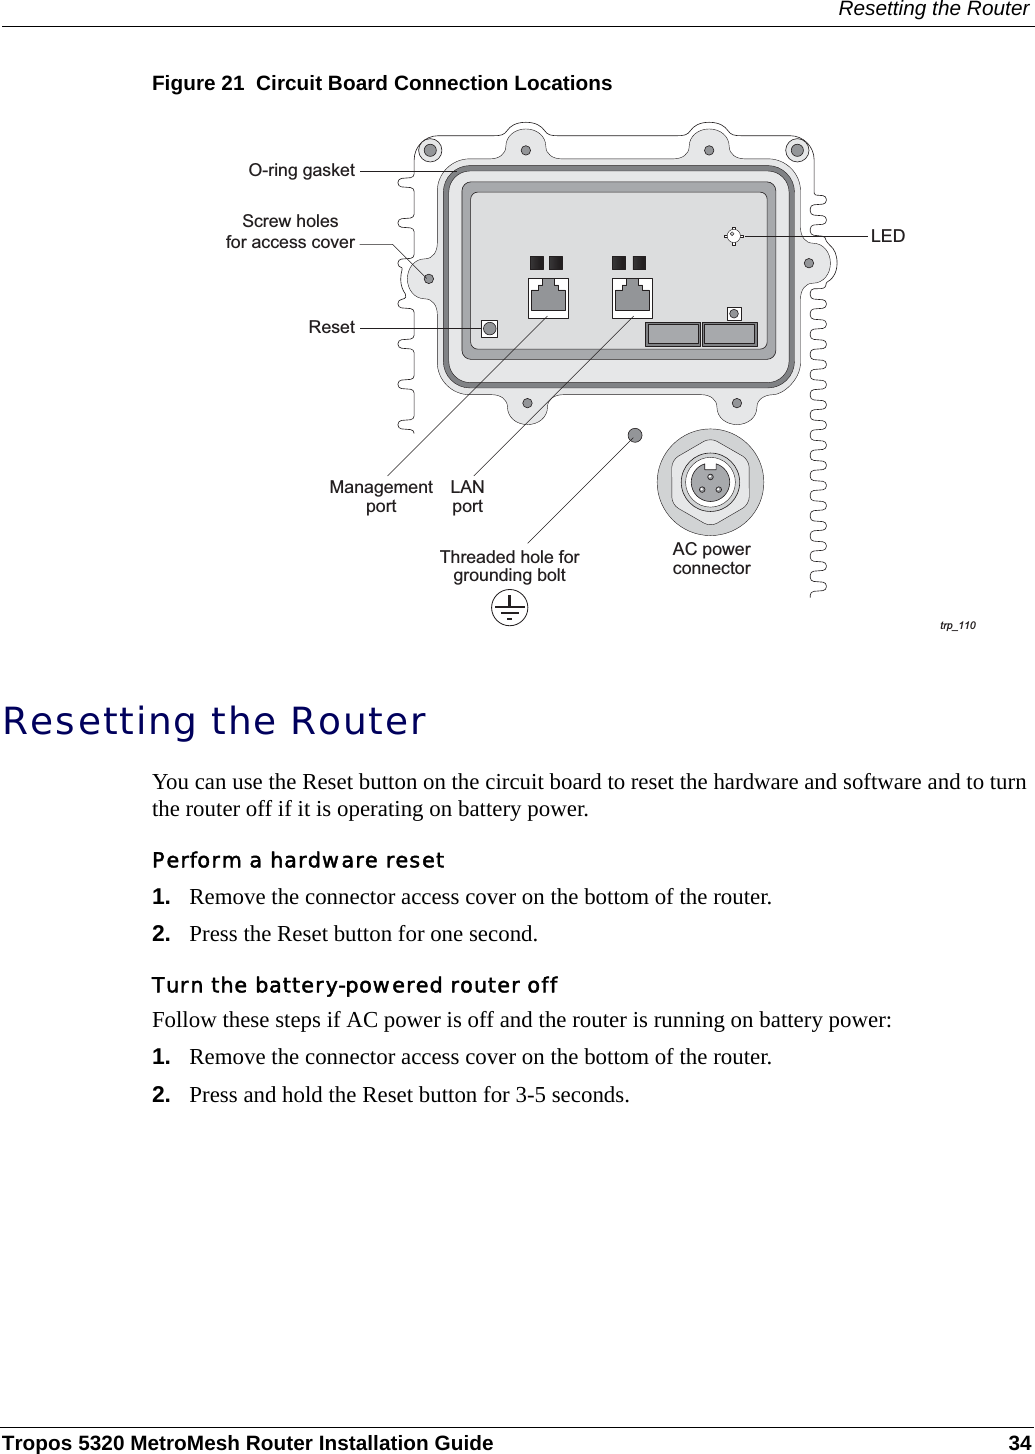 Resetting the RouterTropos 5320 MetroMesh Router Installation Guide 34Figure 21  Circuit Board Connection LocationsResetting the RouterYou can use the Reset button on the circuit board to reset the hardware and software and to turn the router off if it is operating on battery power. Perform a hardware reset1. Remove the connector access cover on the bottom of the router.2. Press the Reset button for one second.Turn the battery-powered router off Follow these steps if AC power is off and the router is running on battery power:1. Remove the connector access cover on the bottom of the router.2. Press and hold the Reset button for 3-5 seconds.trp_110AC powerconnectorManagementportResetScrew holesfor access cover LEDThreaded hole forgrounding boltO-ring gasketLANport